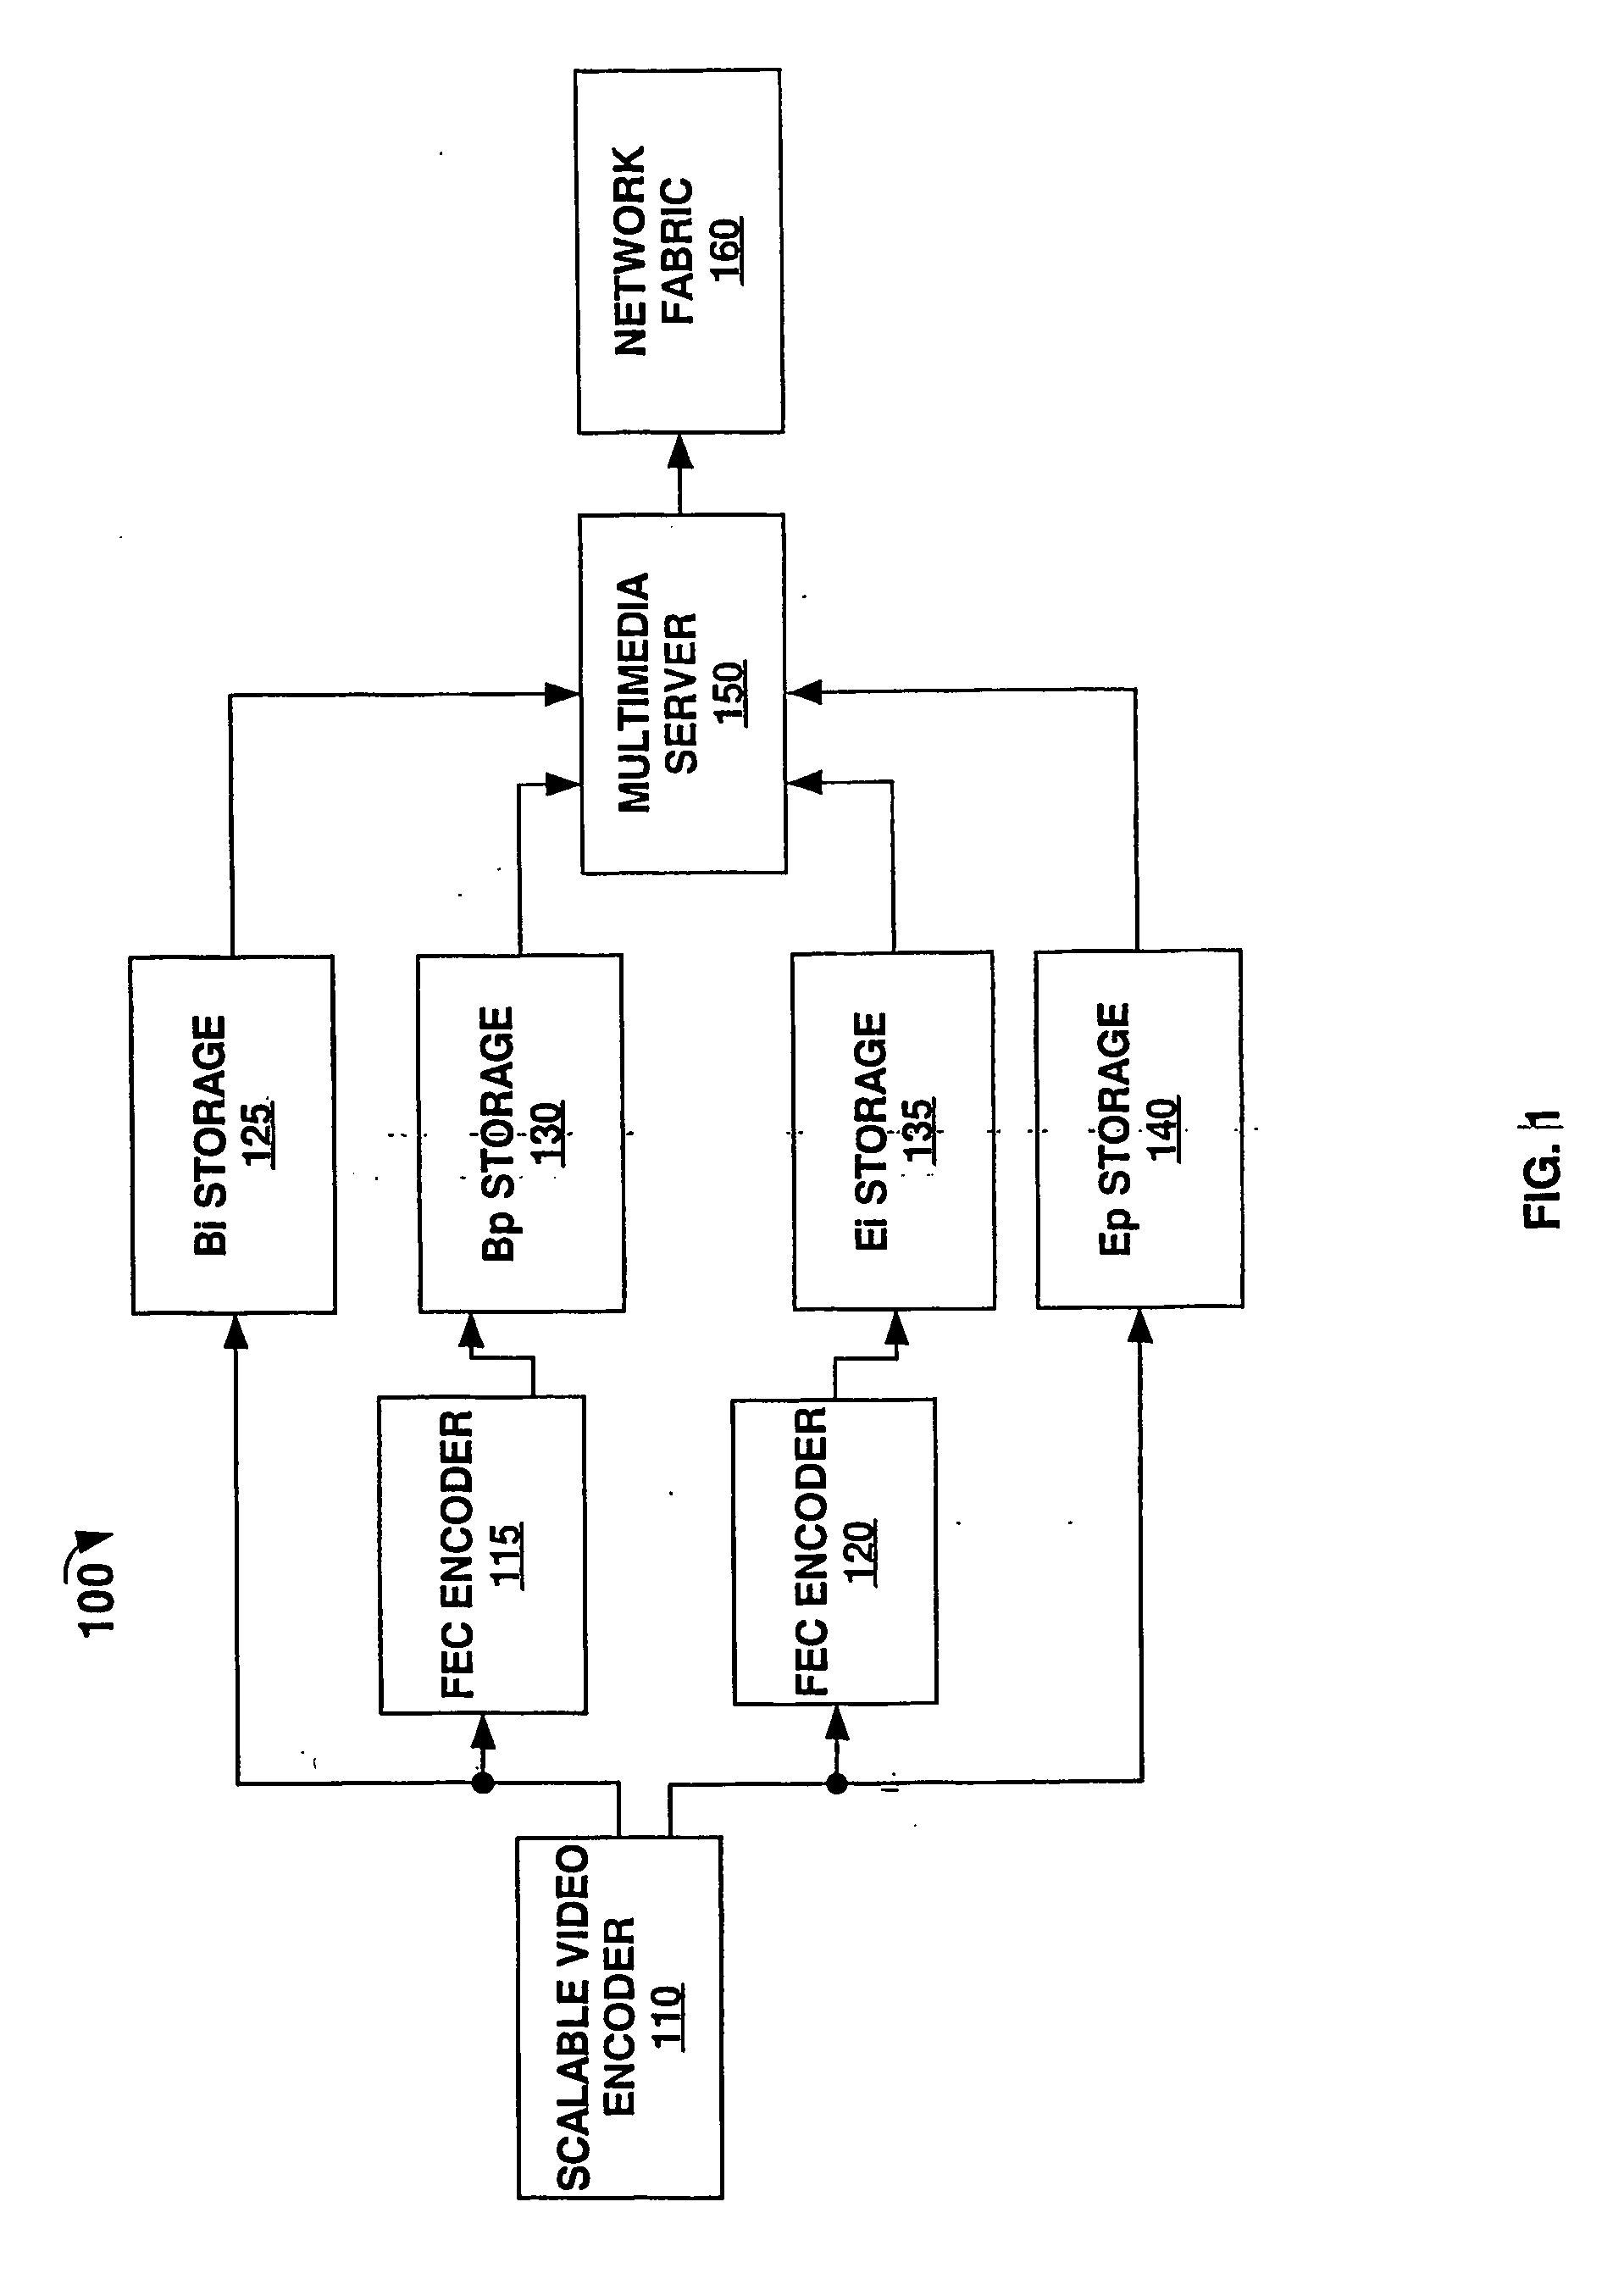 Multimedia server with simple adaptation to dynamic network loss conditions